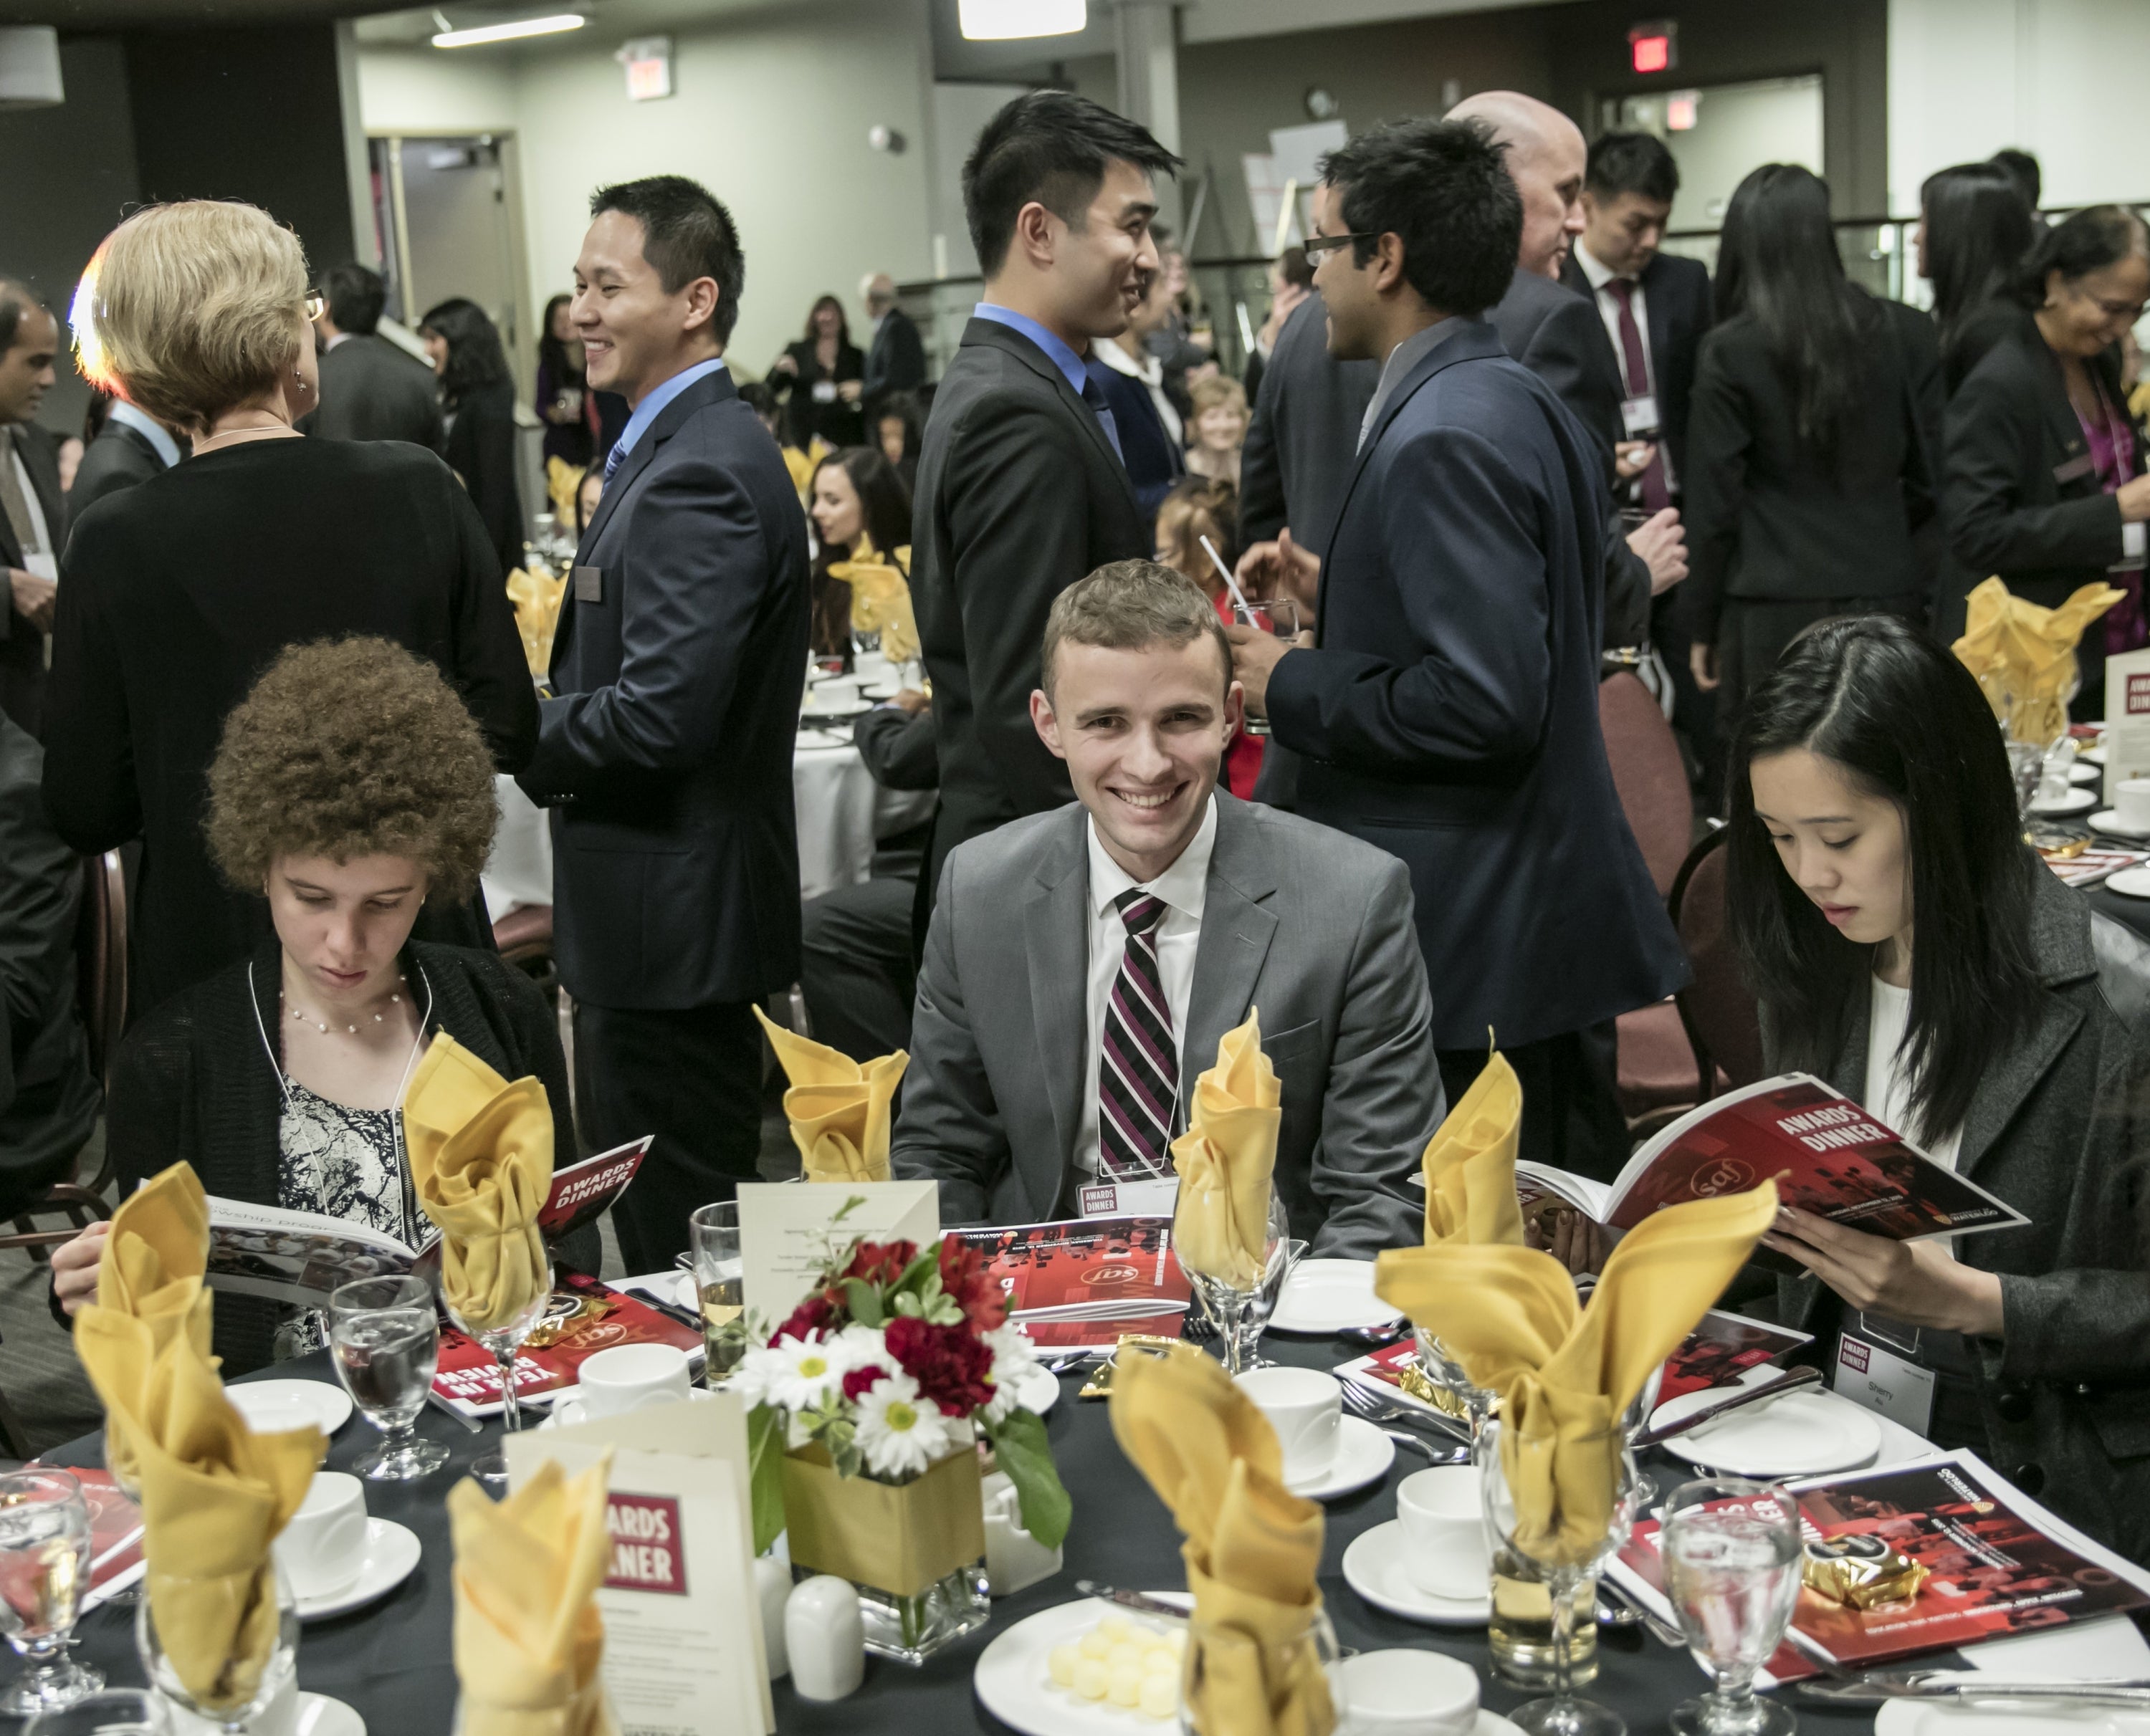 Students sitting at a table, with others in the background mingling